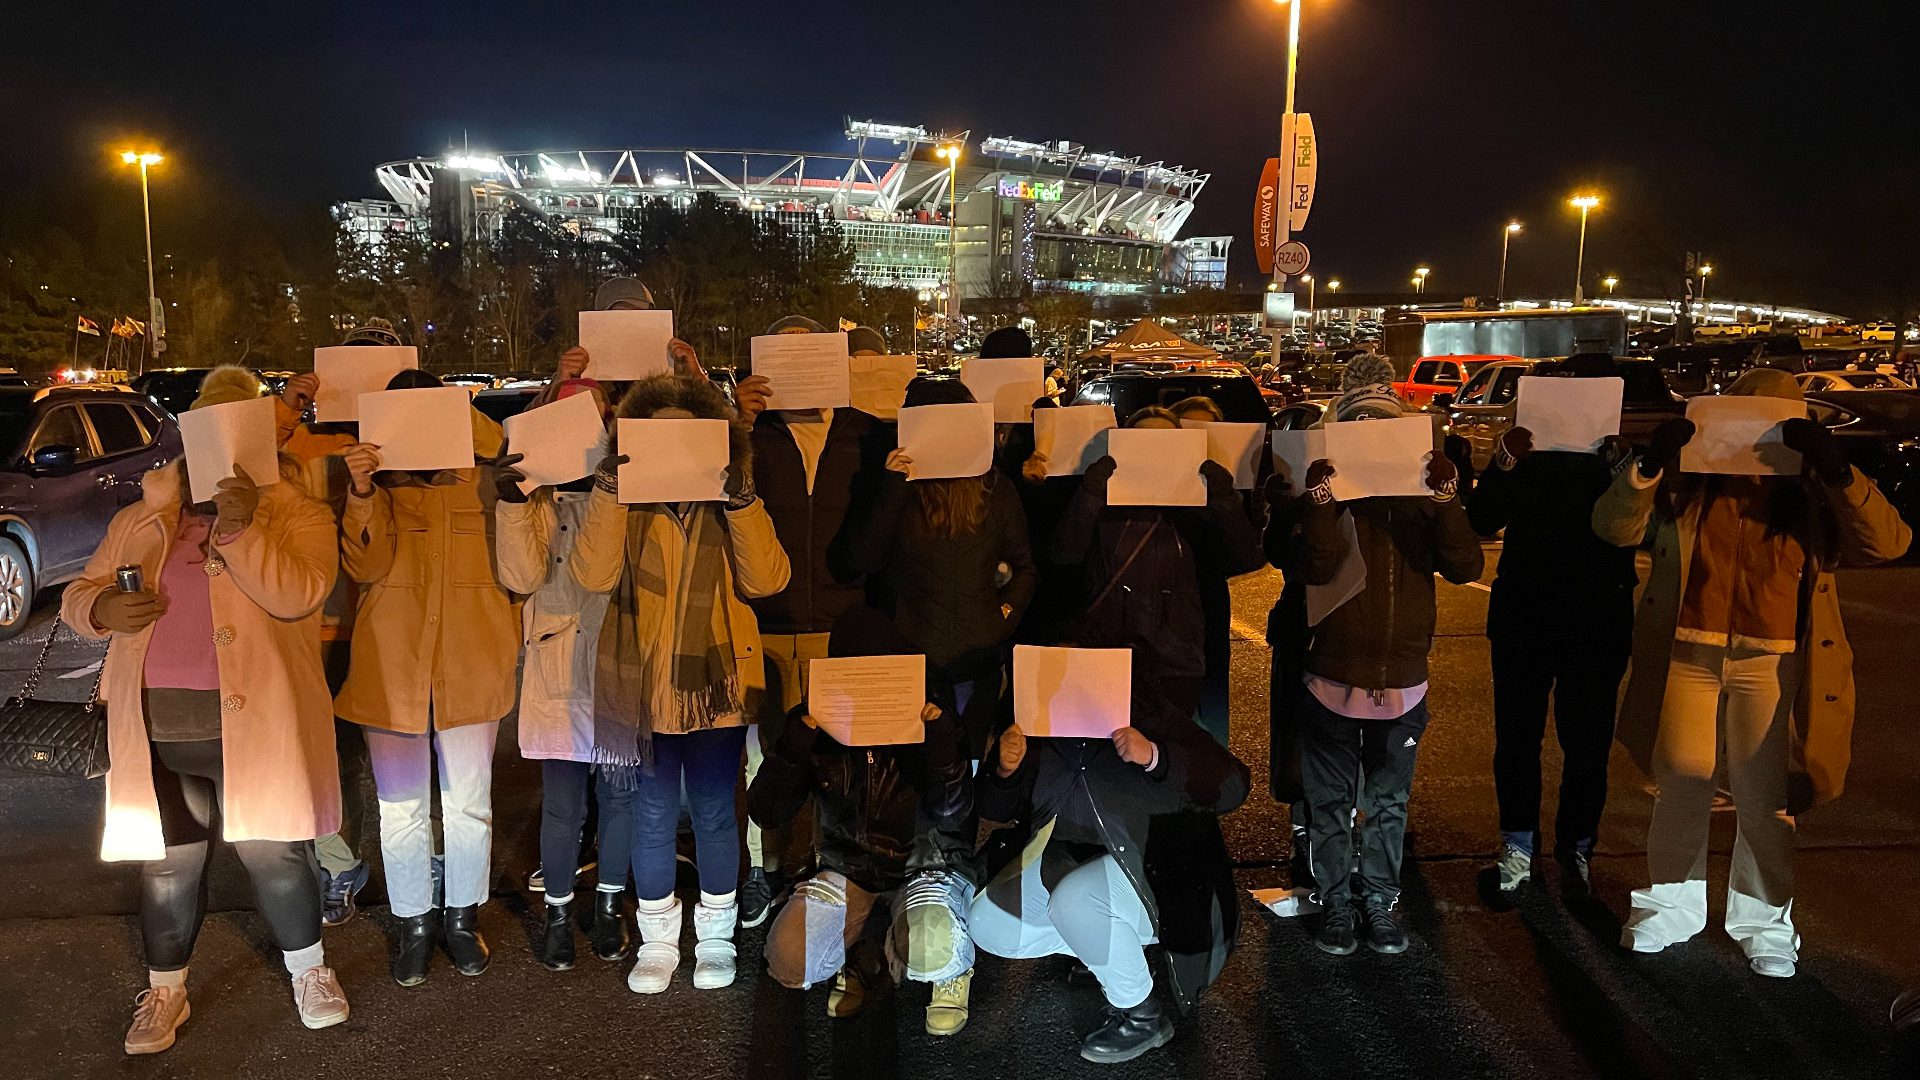 SFL activists attended sporting events over the weekend, handing out pieces of white paper to spectators with a message about the ongoing protests in China